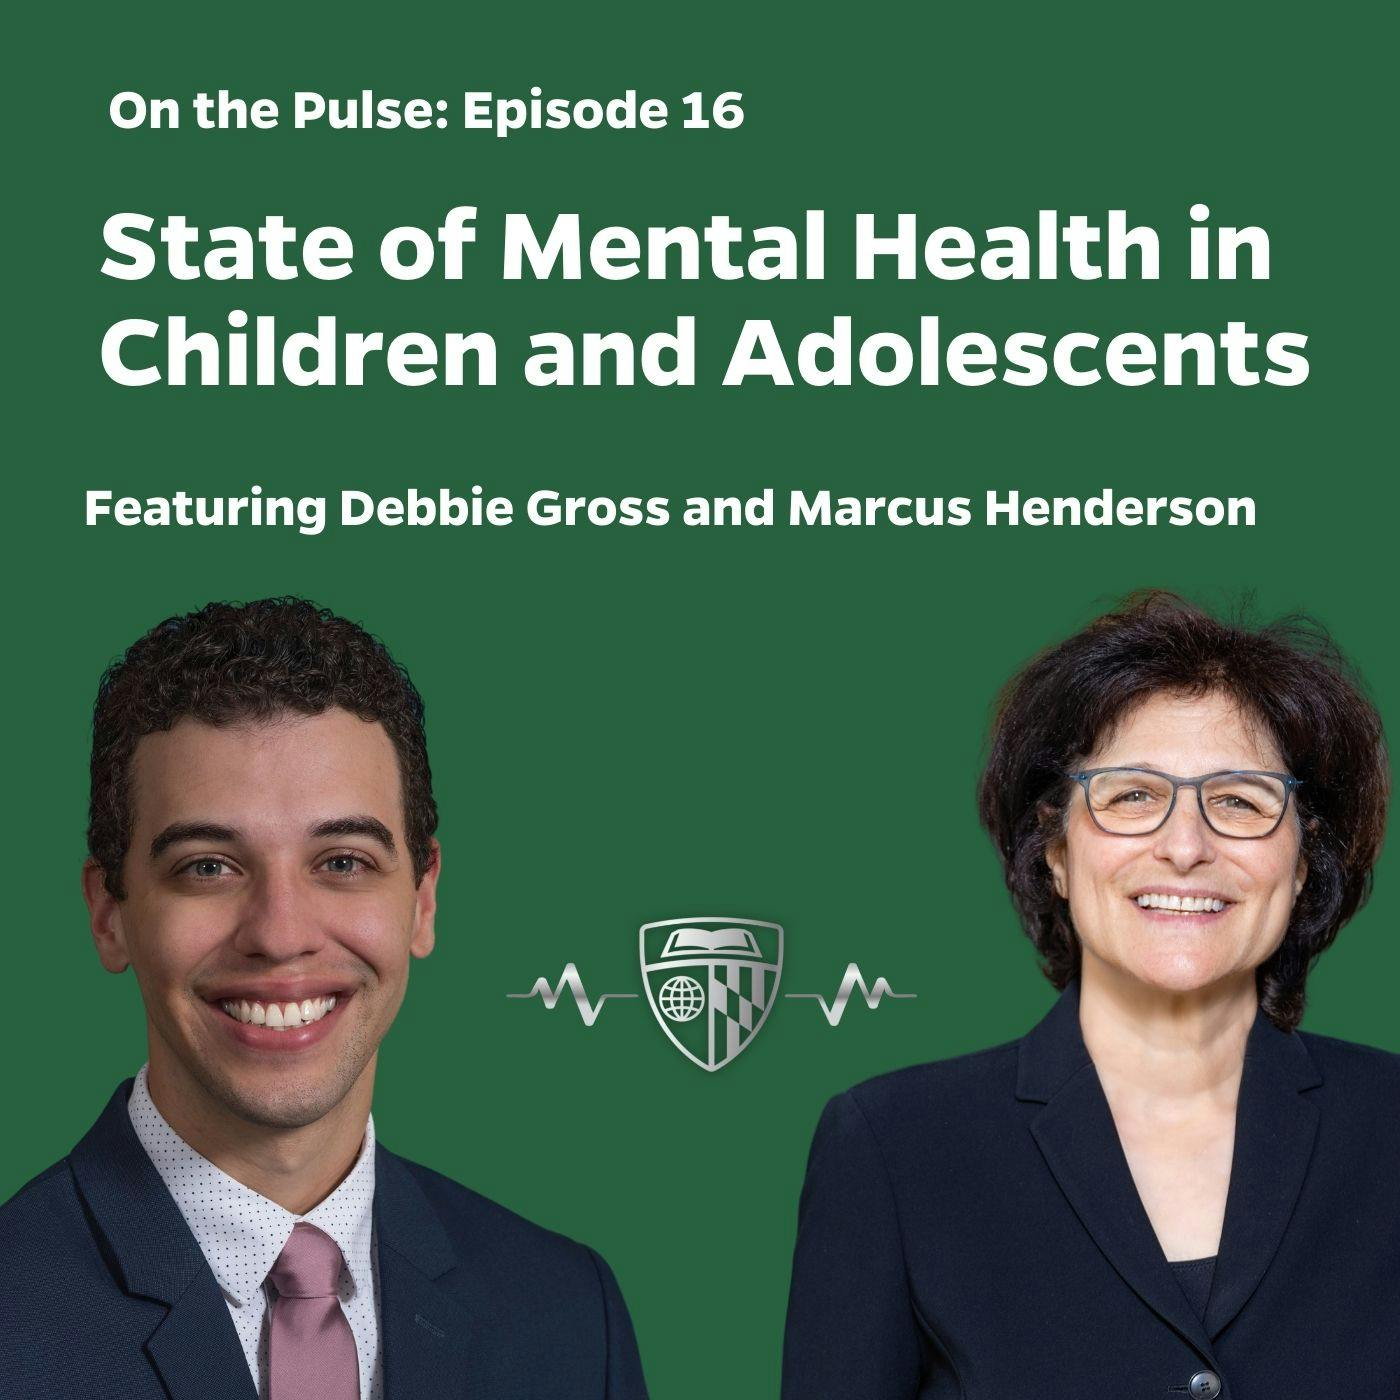 Episode 16: State of Mental Health in Children and Adolescents